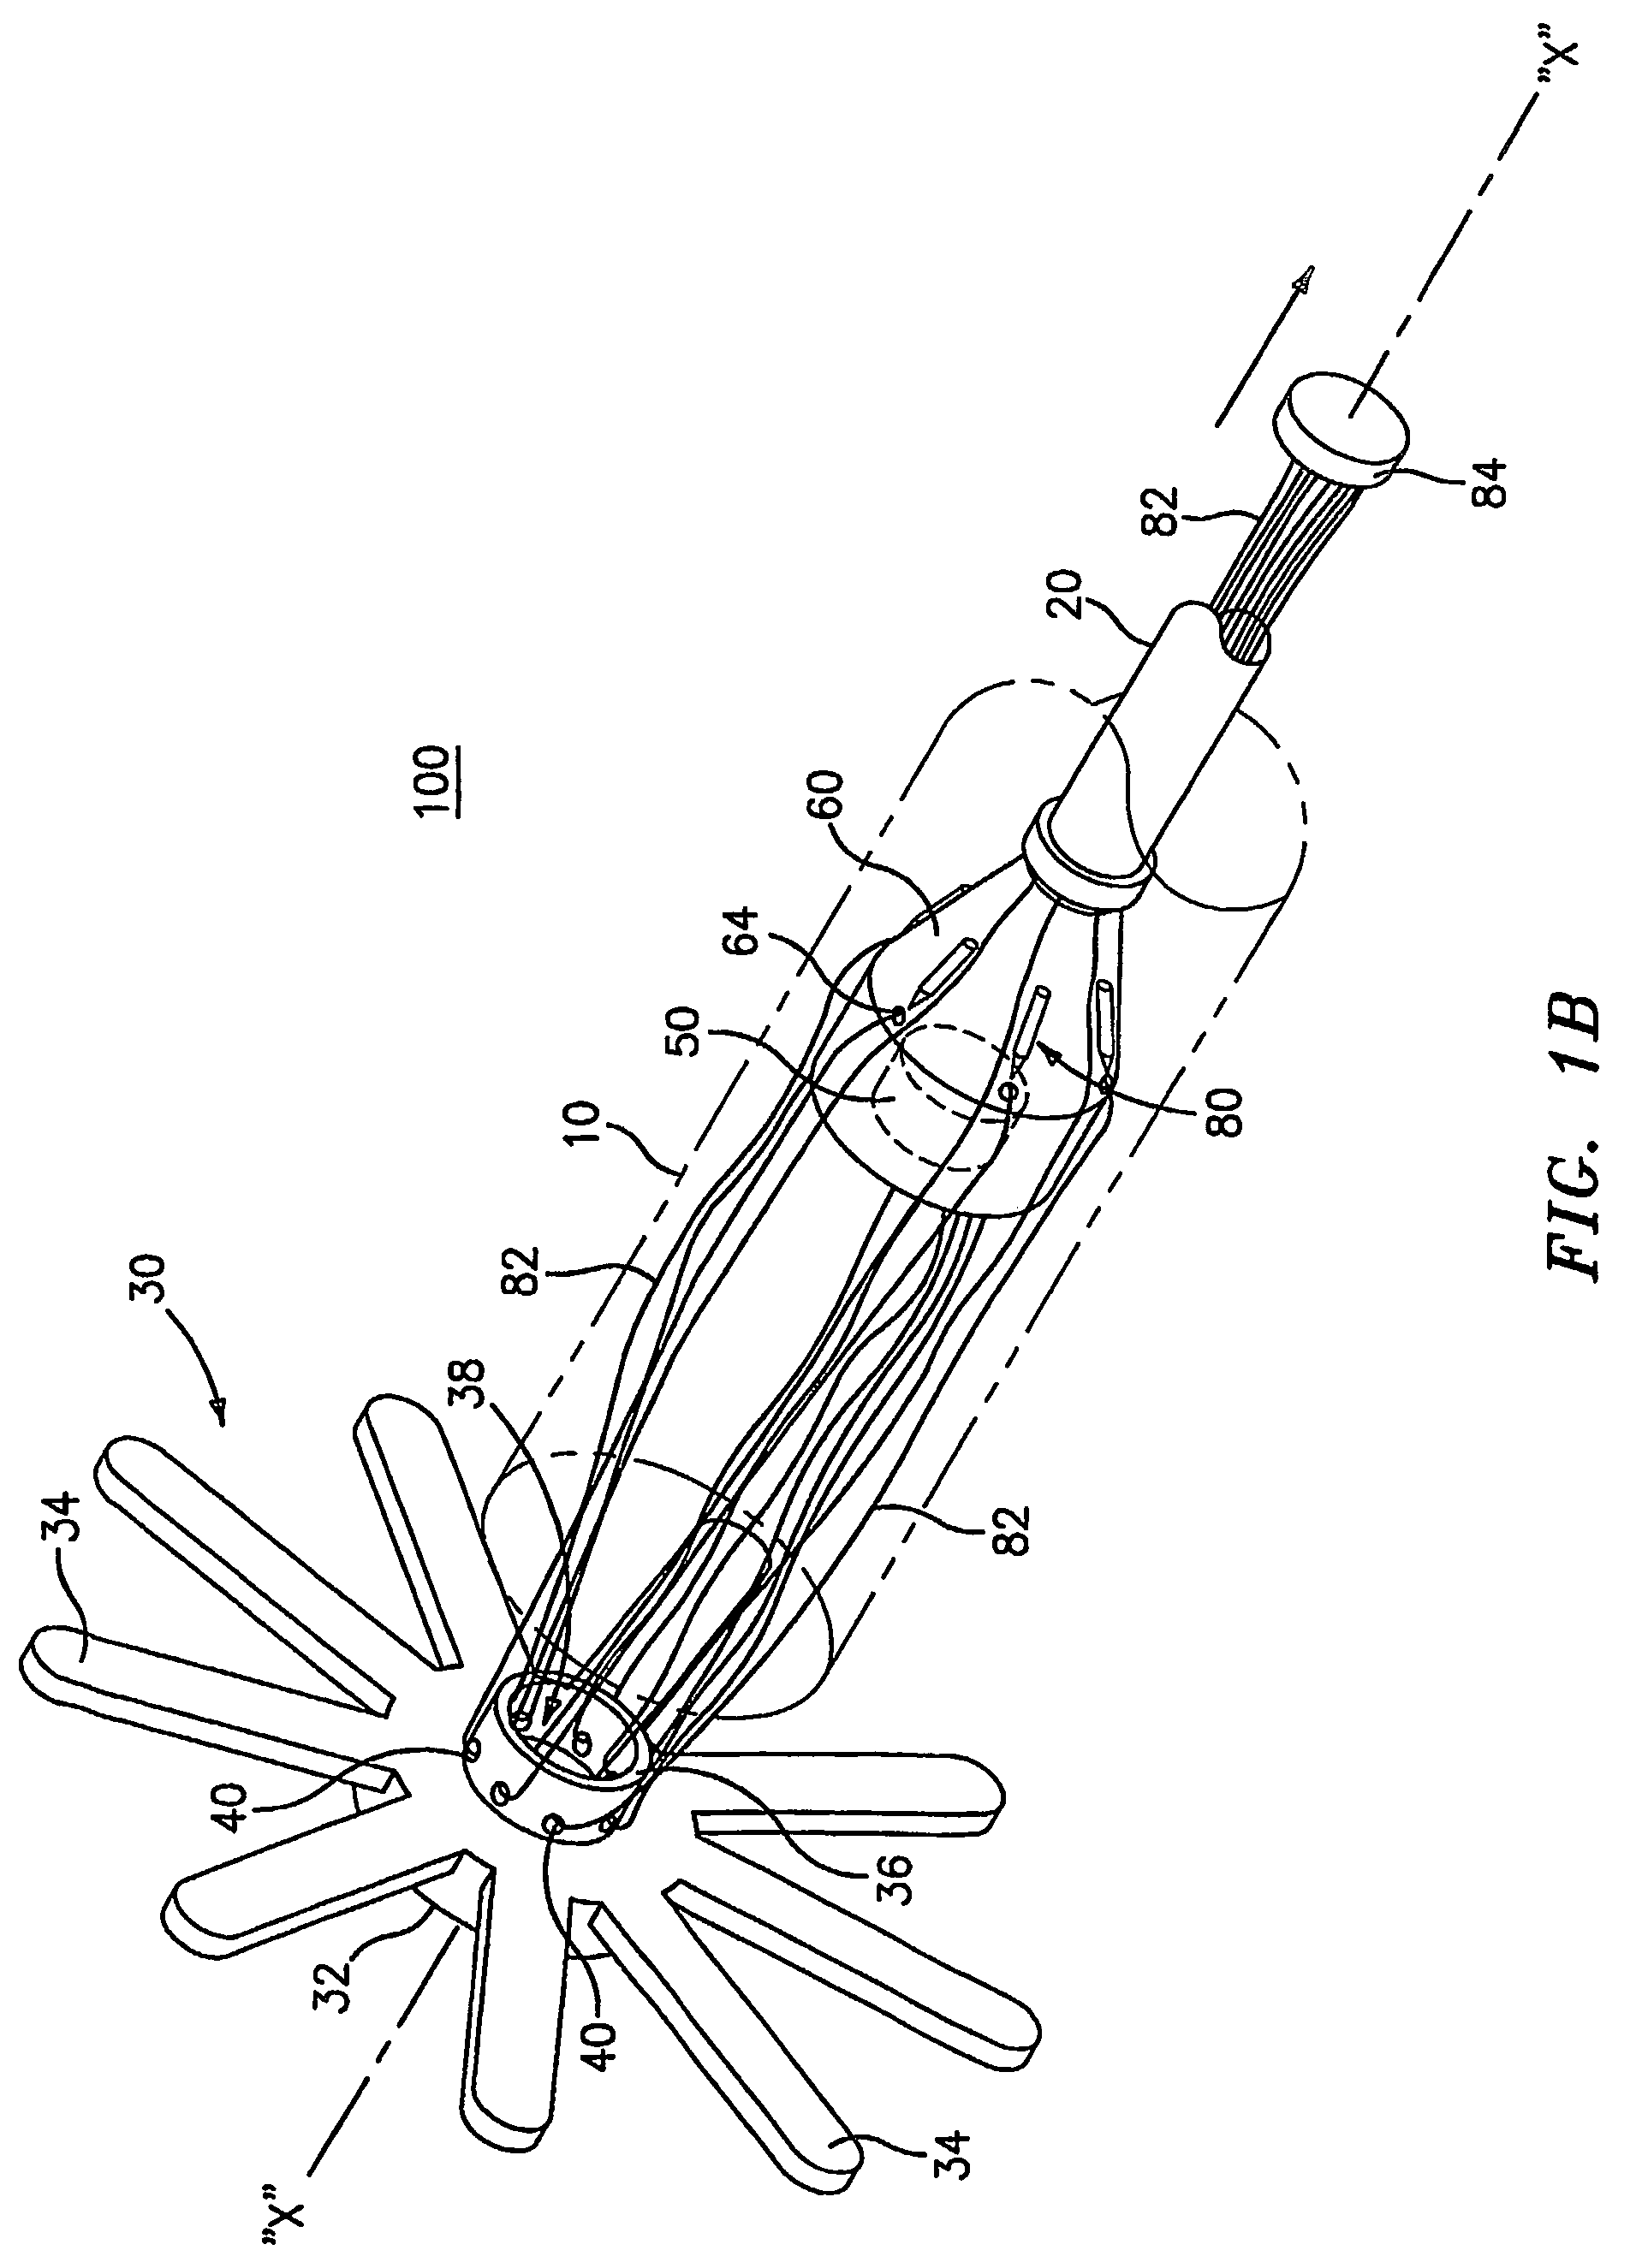 Method and apparatus for radical prostatectomy anastomosis including an anchor for engaging a body vessel and deployable sutures